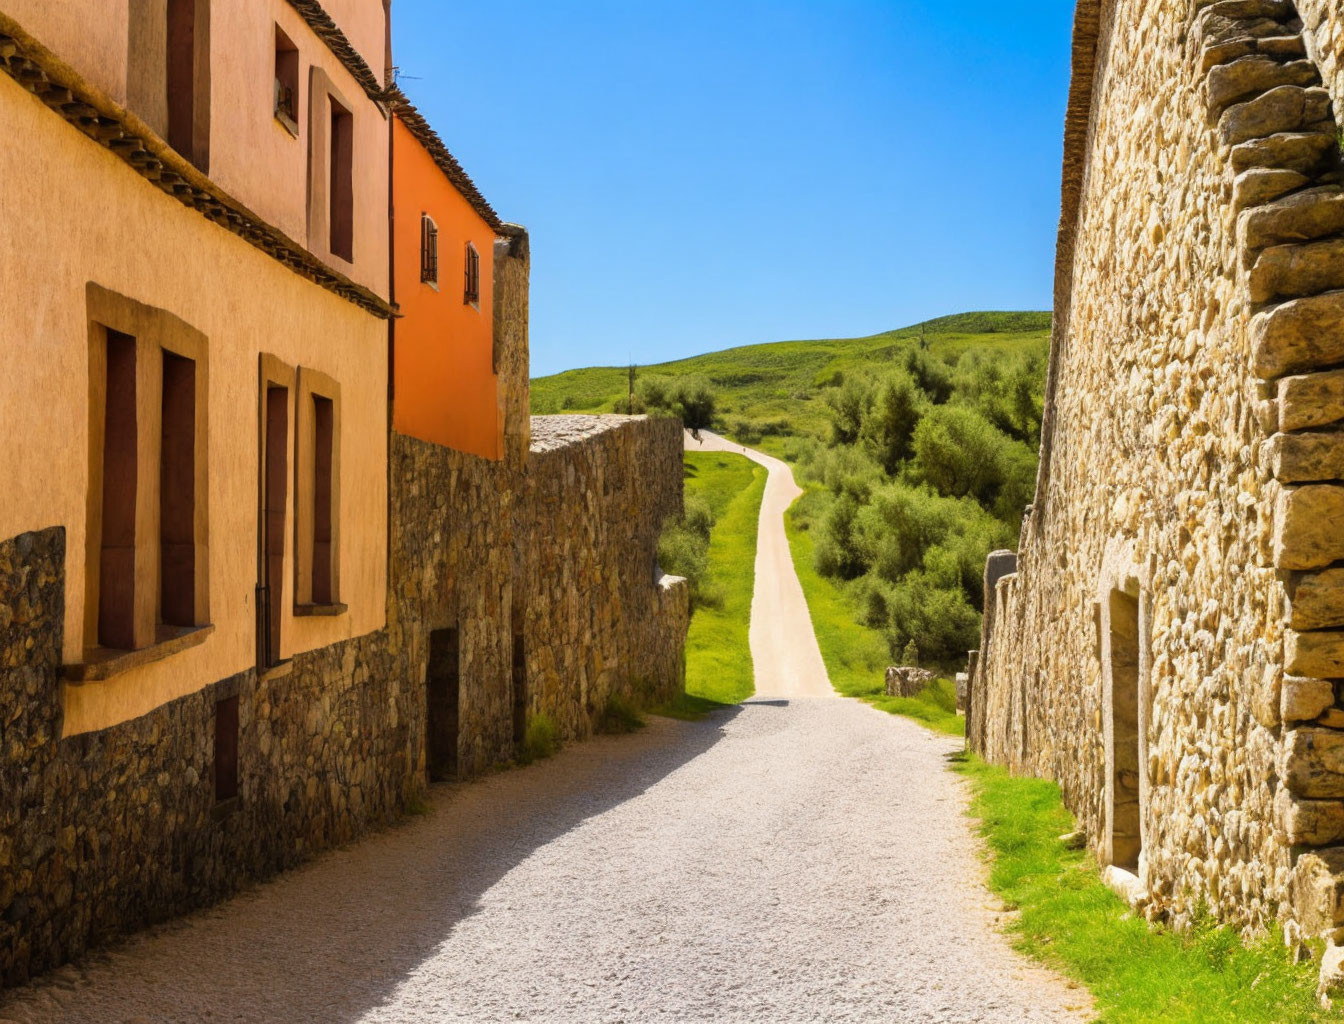 Sunny Day Path with Stone Wall and Orange Buildings in Green Hills